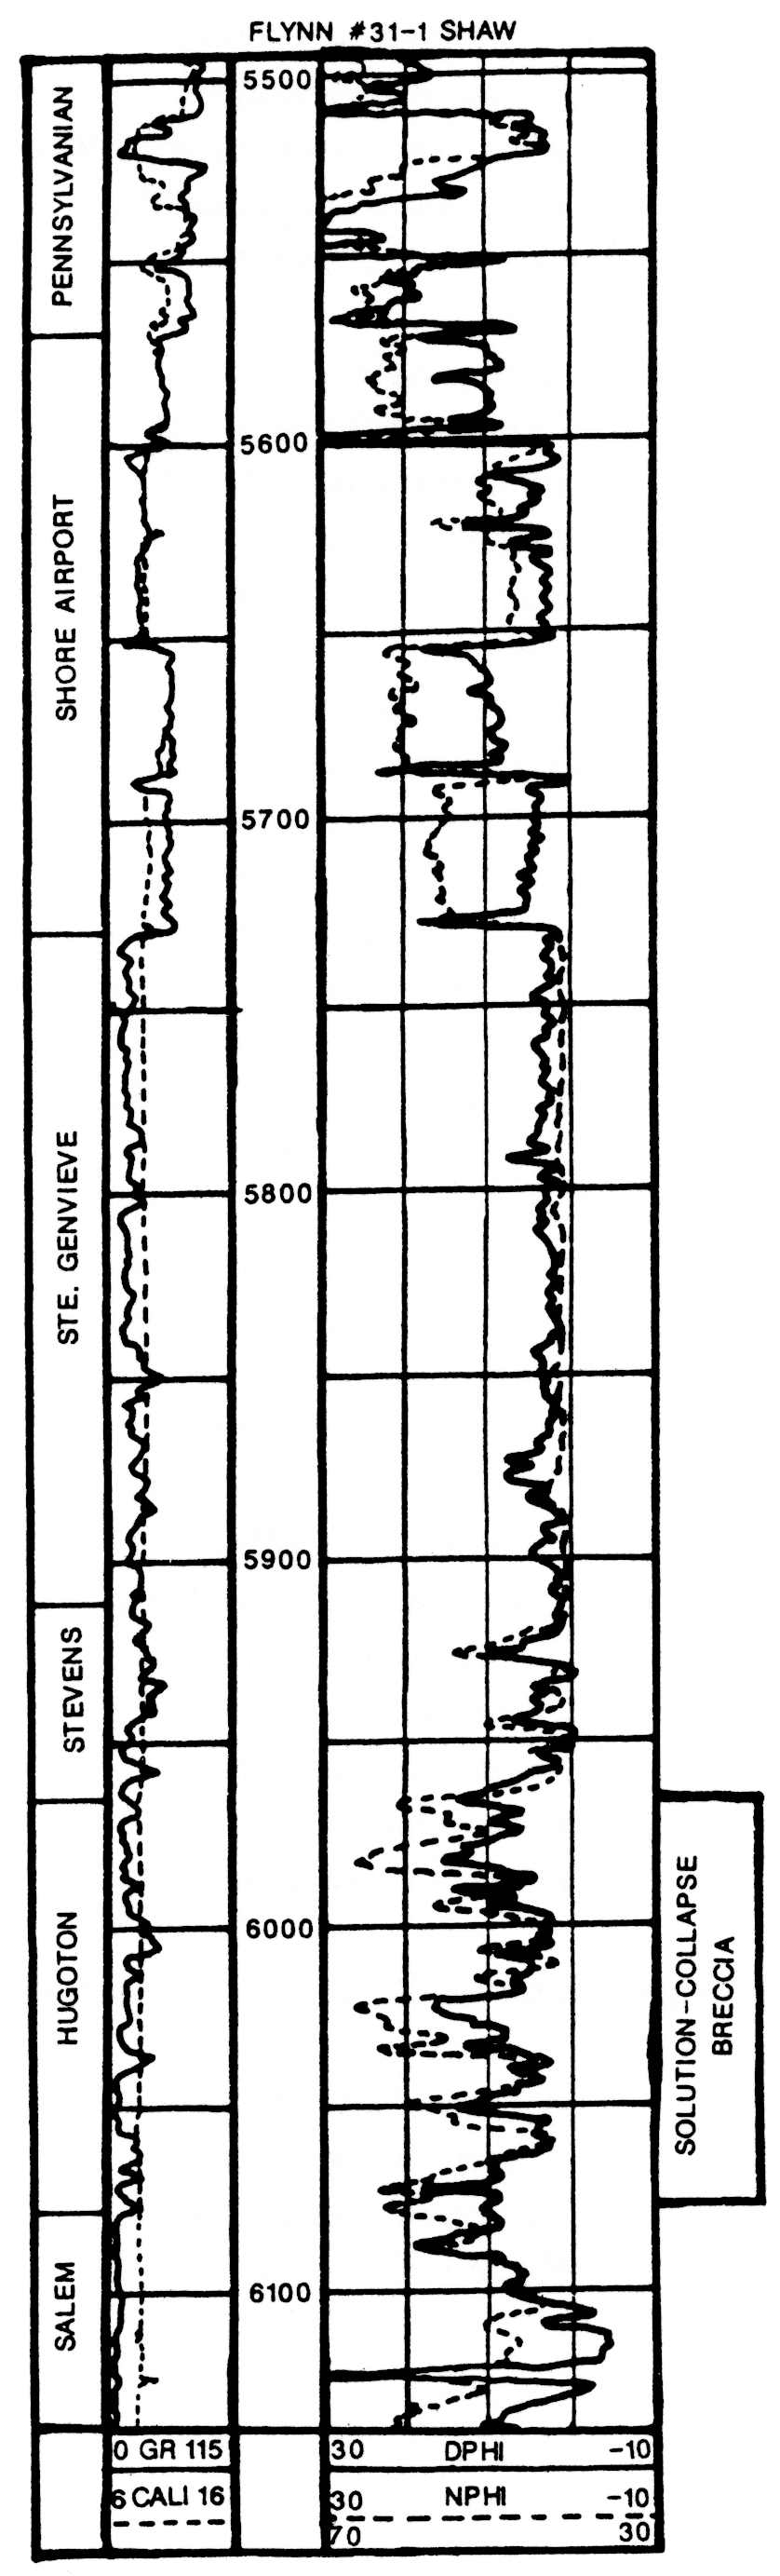 Gamma-ray and neutron-density logs from the Flynn #31-1 Shaw (sec. 31, T. 31 S., R. 34 W.).